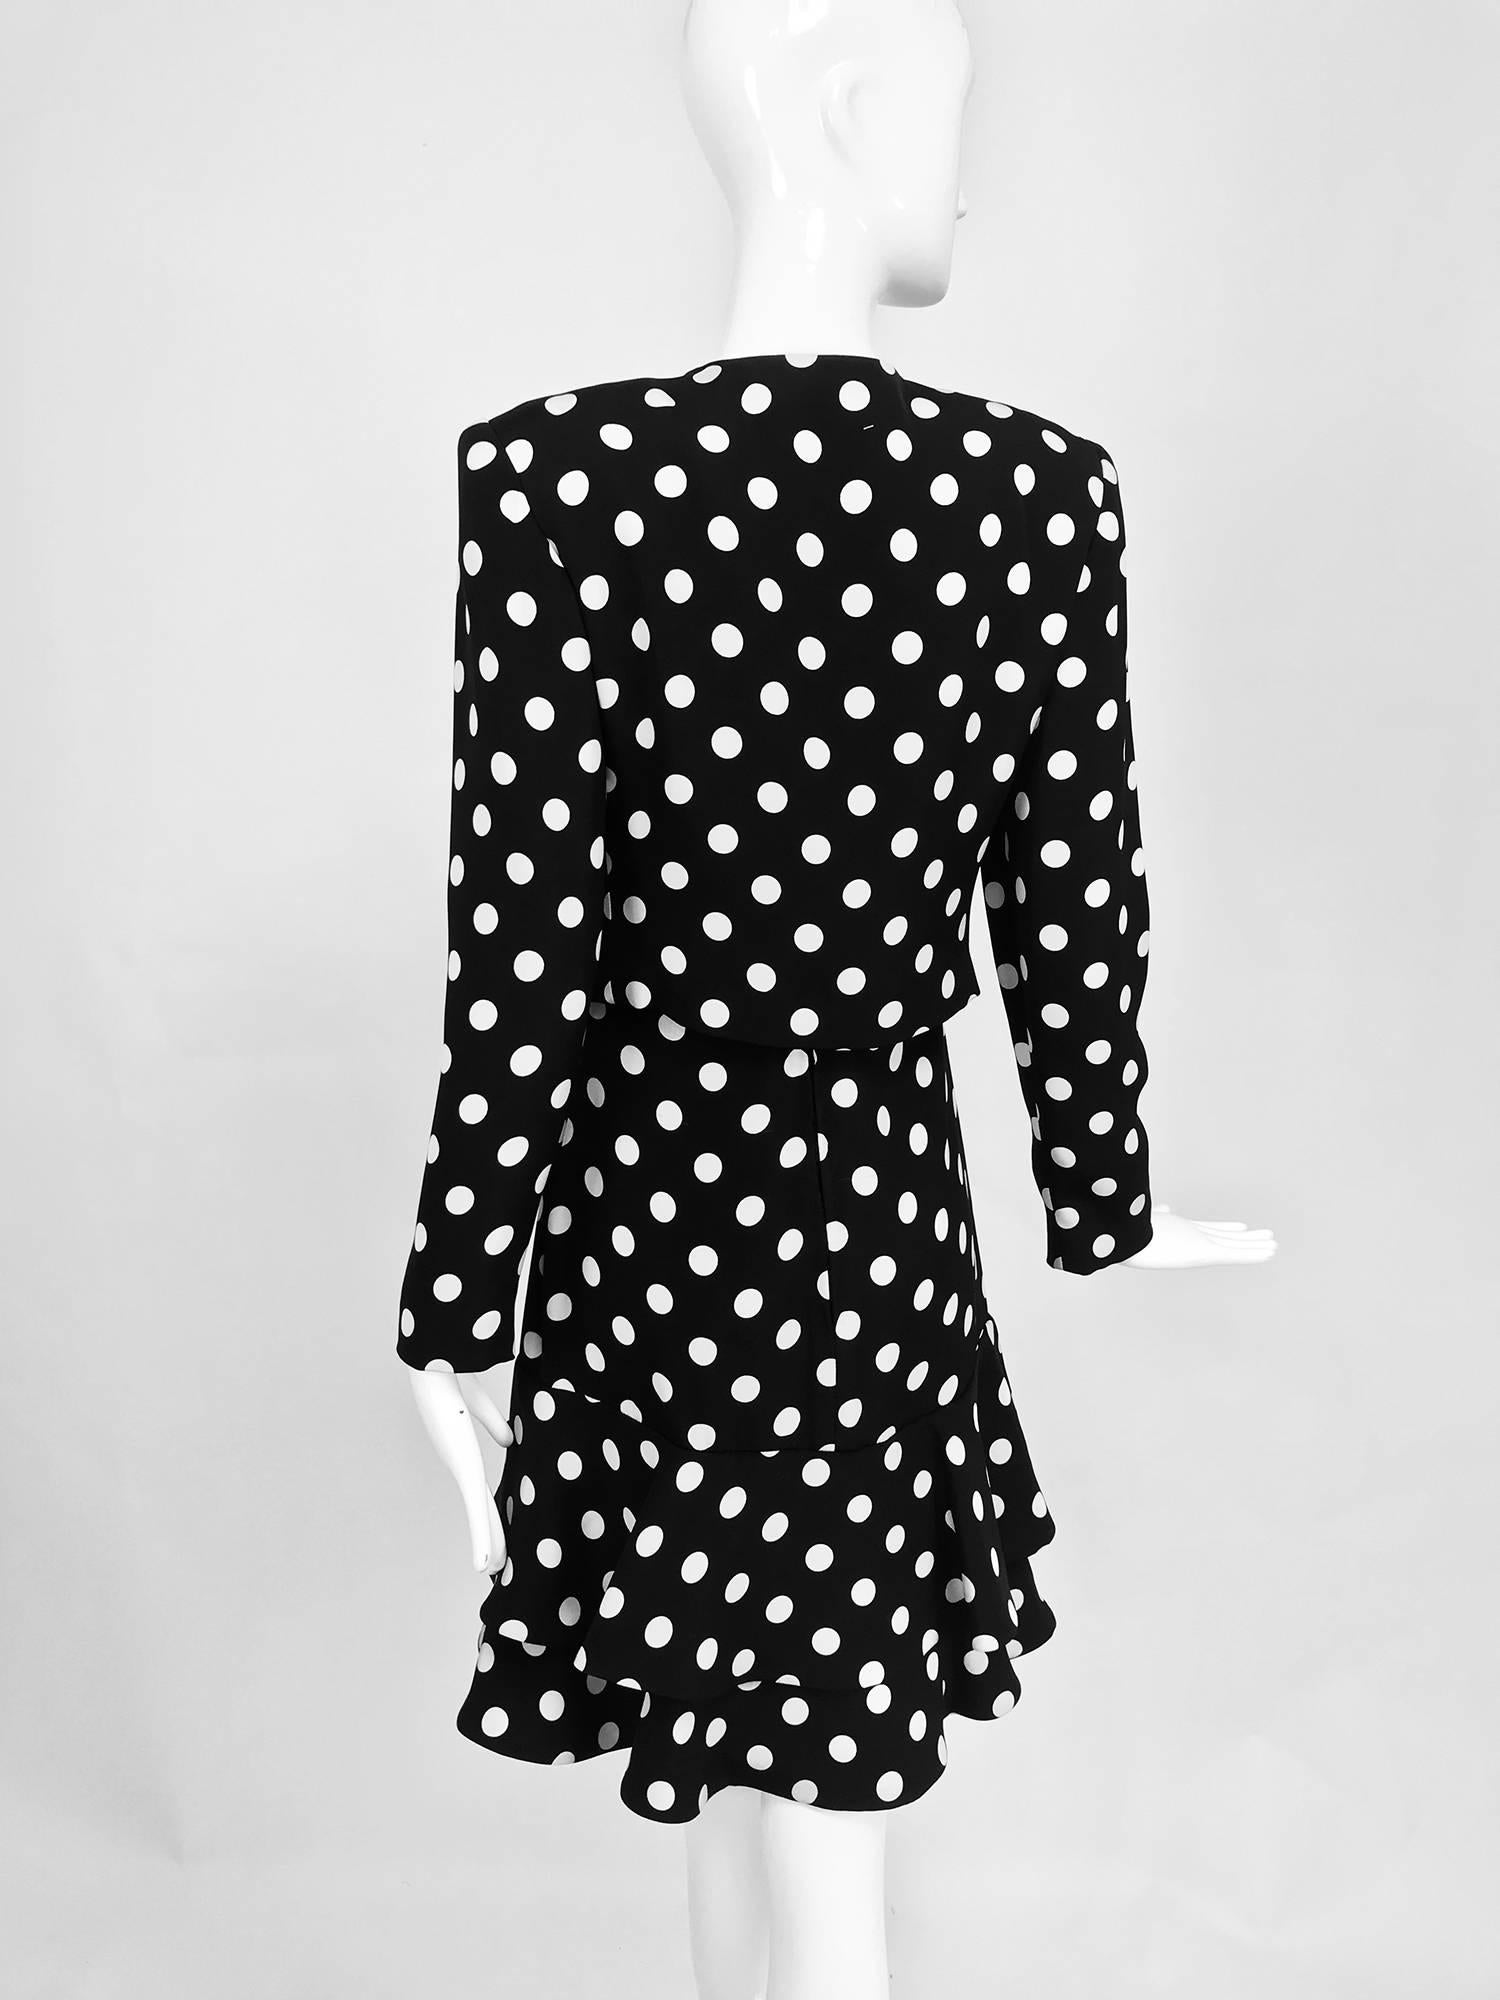 Carolyne Roehm black and white polka dot strapless dress and jacket 1990s For Sale 4